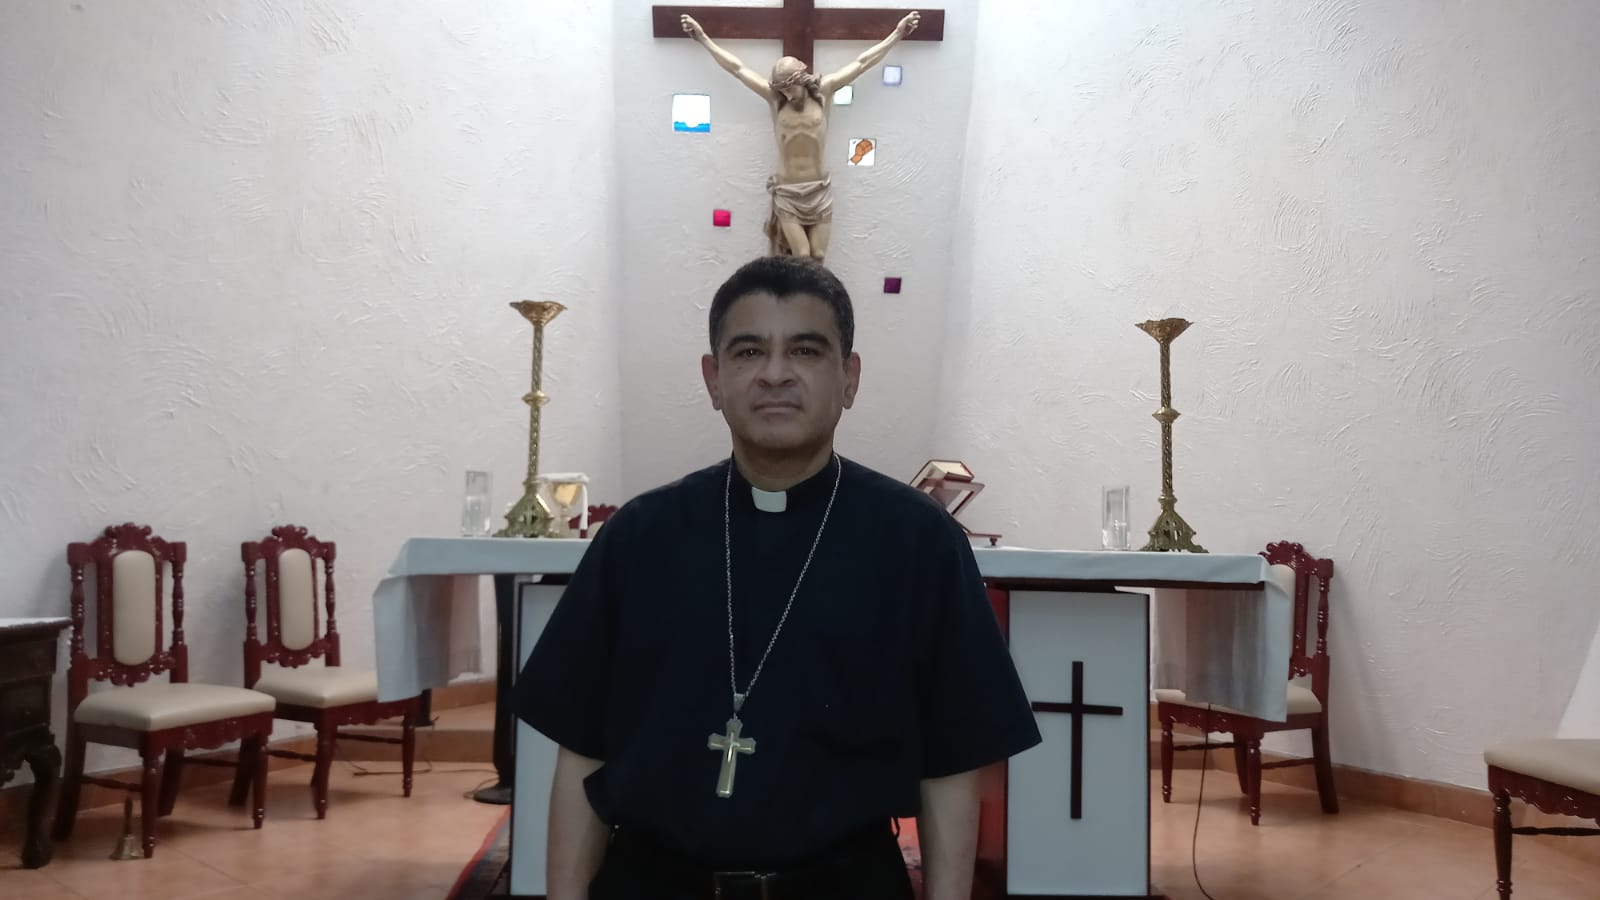 Unamos stands in solidarity with the priests persecuted by Ortega: "They are not alone"